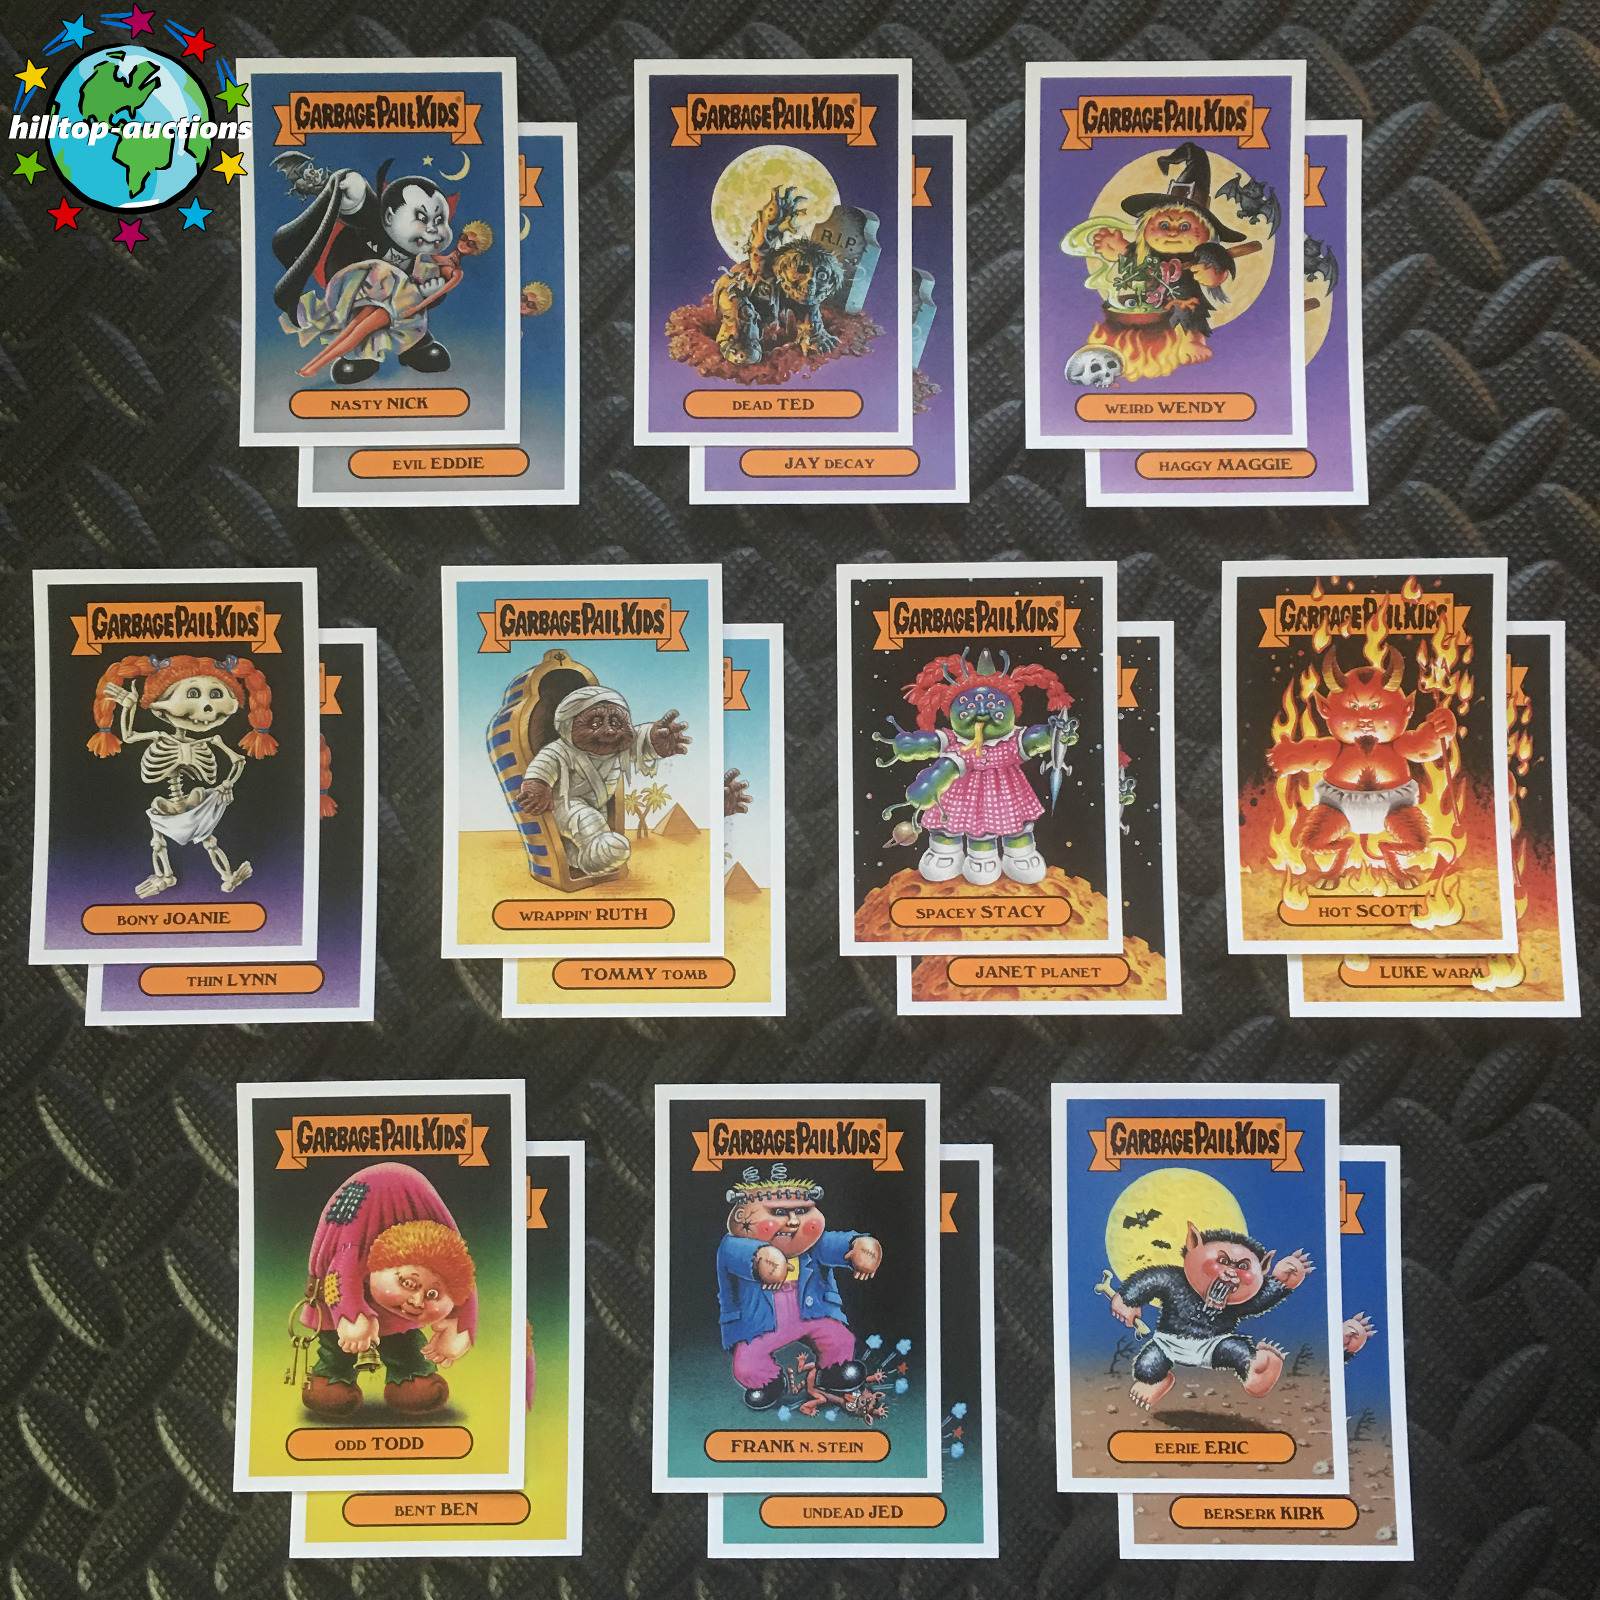 GARBAGE PAIL KIDS OH THE HORROR-IBLE CLASSIC MONSTER 20-CARD SET 2018 +WRAPPER